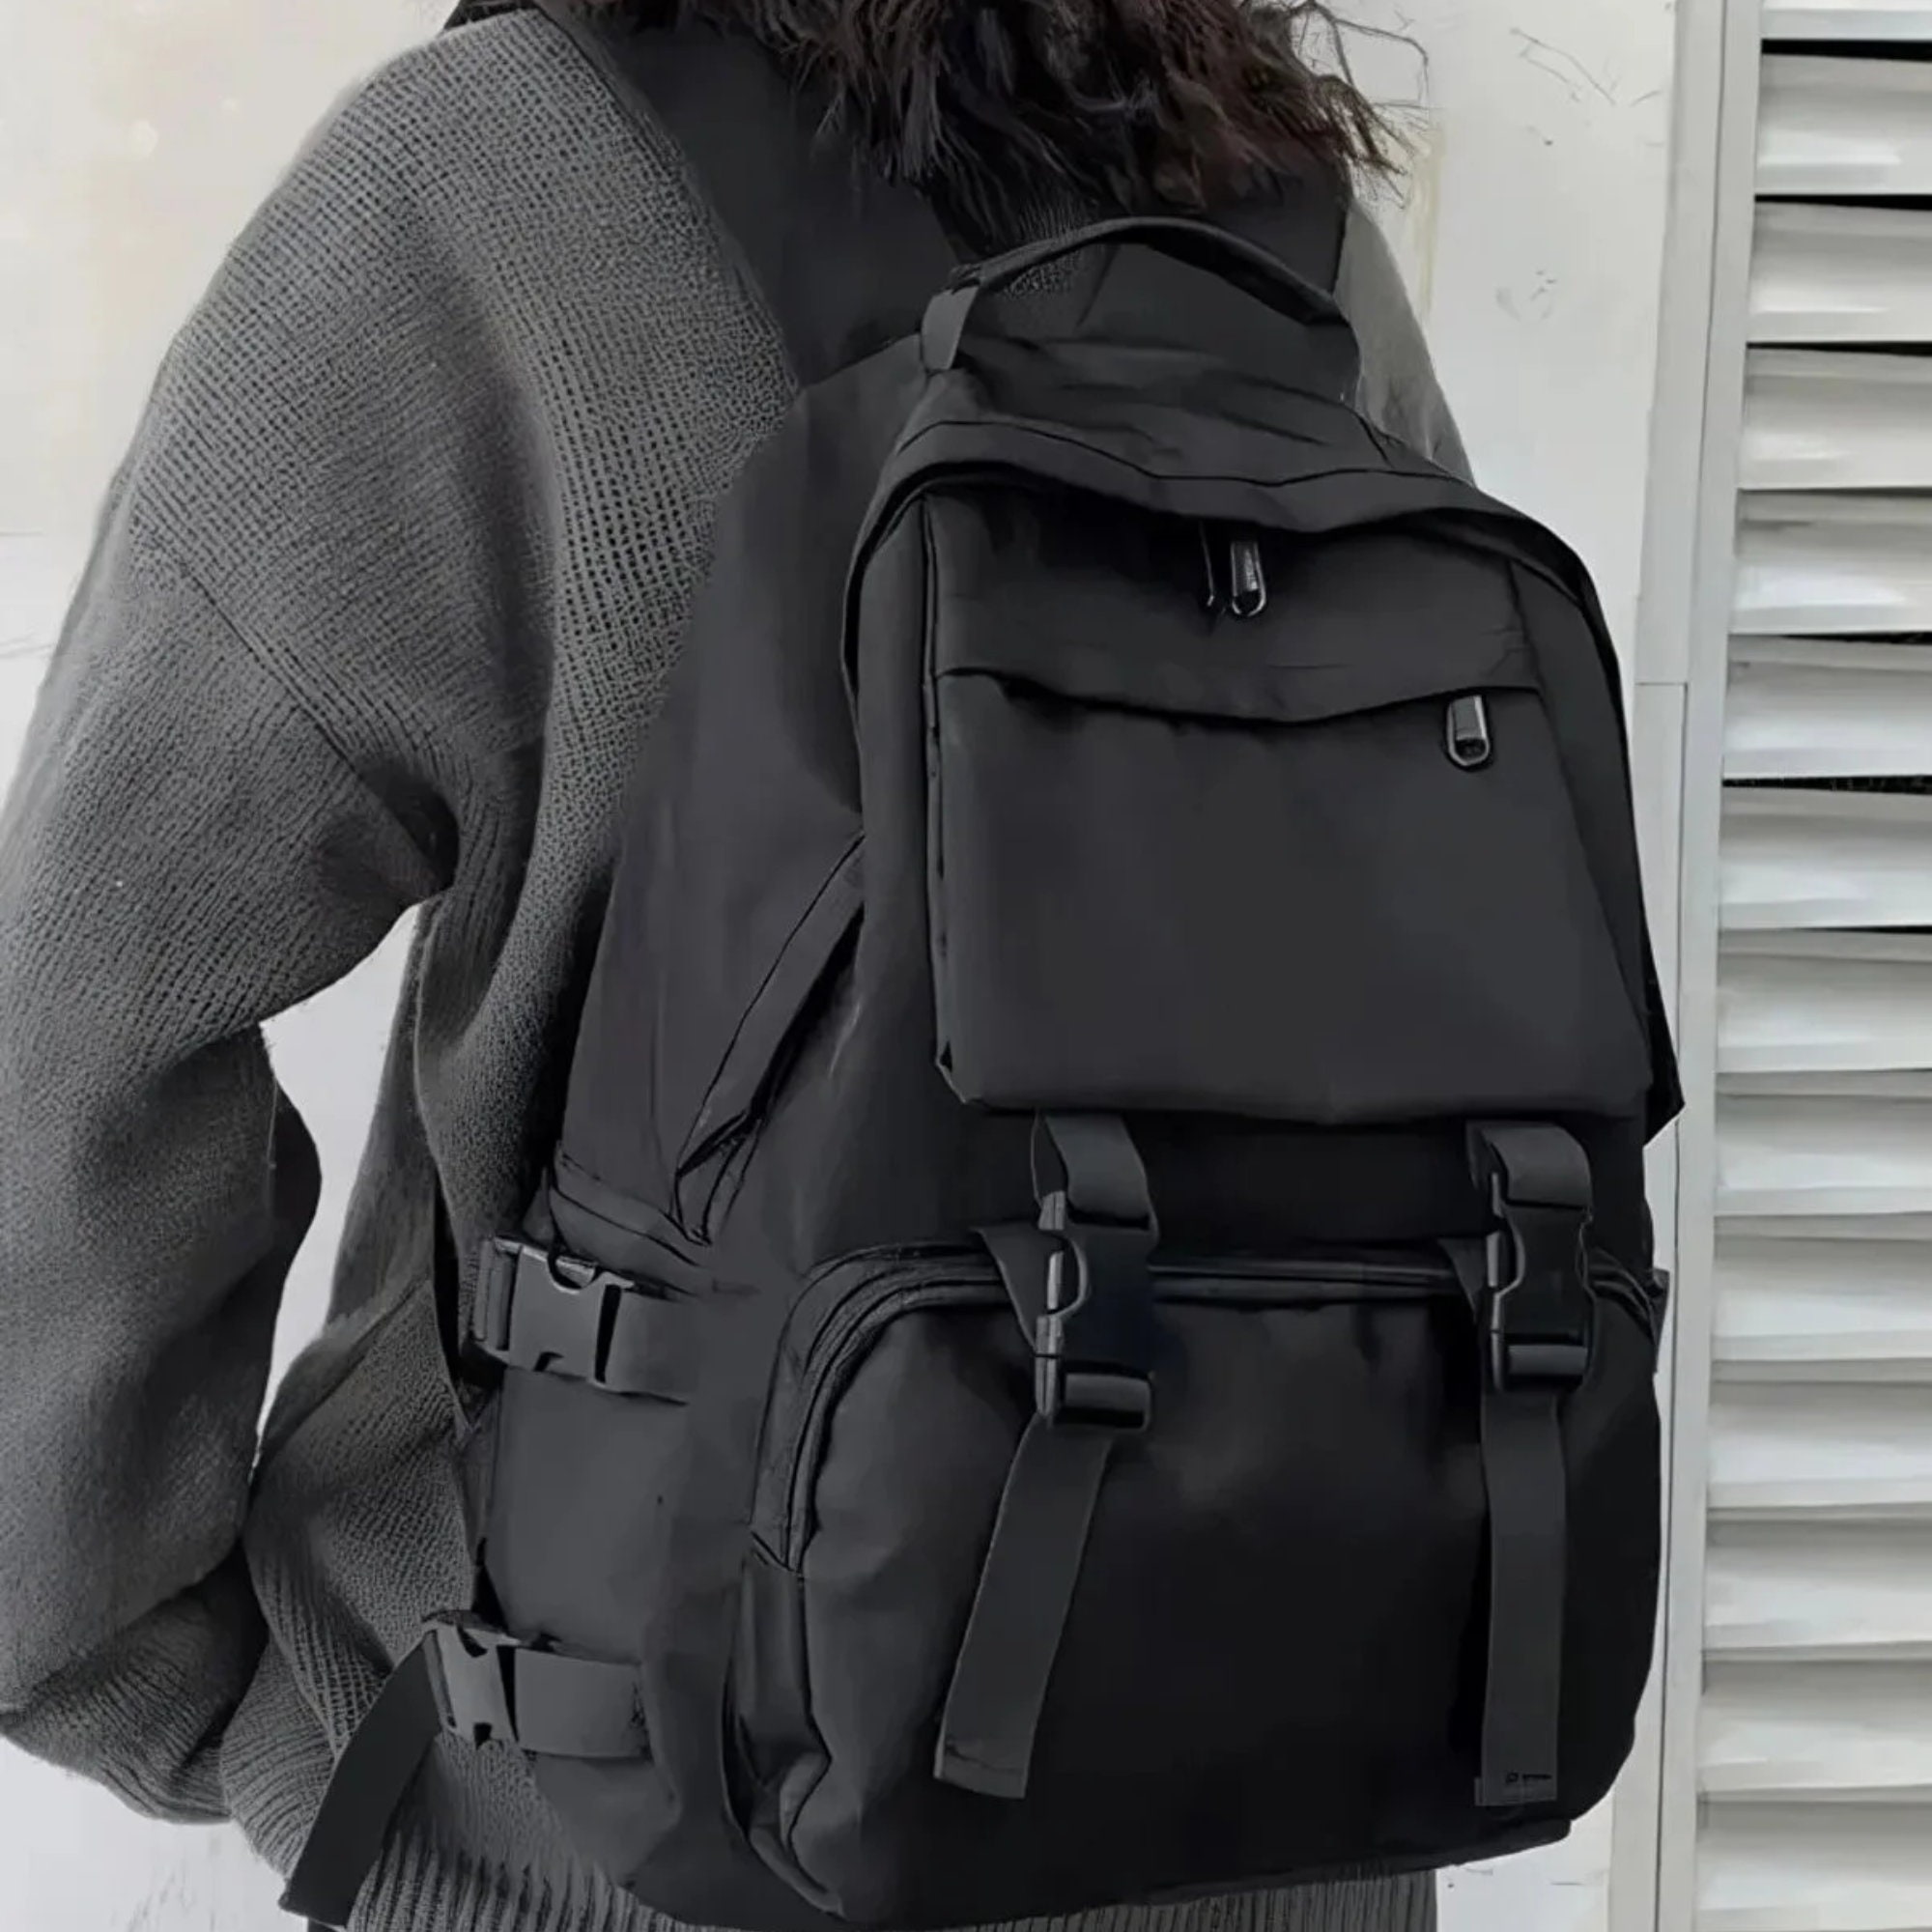 Jet-black Aesthetic Backpackdaily Use Military Style - Etsy